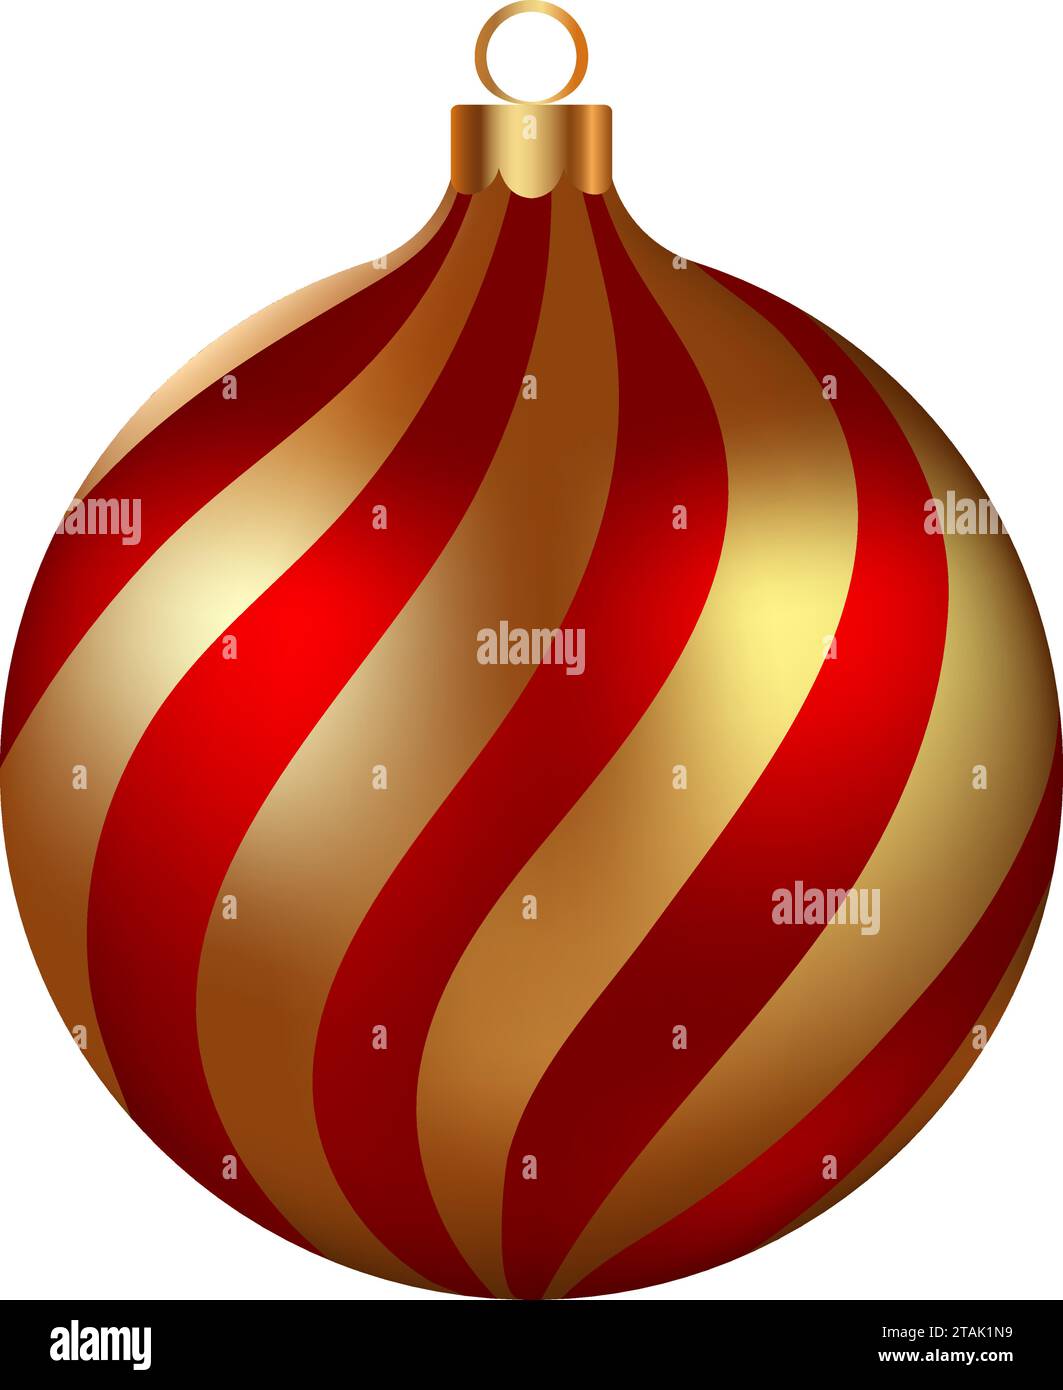 Christmas decoration red glass ball with golden snowflakes ornate. Festive design element for the winter holidays, events, discounts, and sales. Vecto Stock Vector